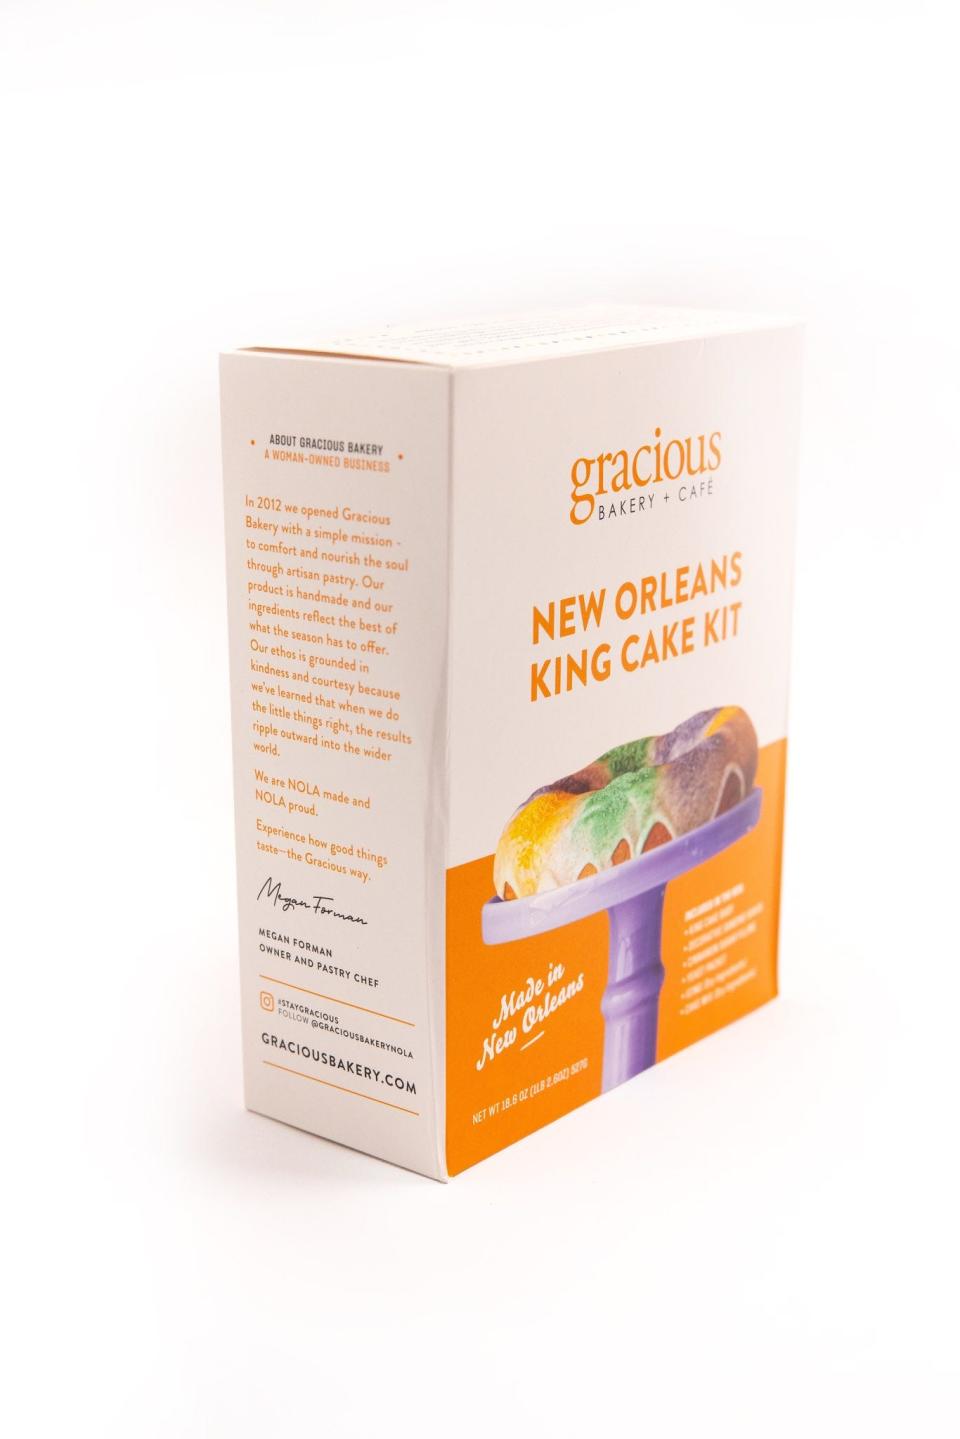 A King Cake kit from Gracious Bakery in New Orleans